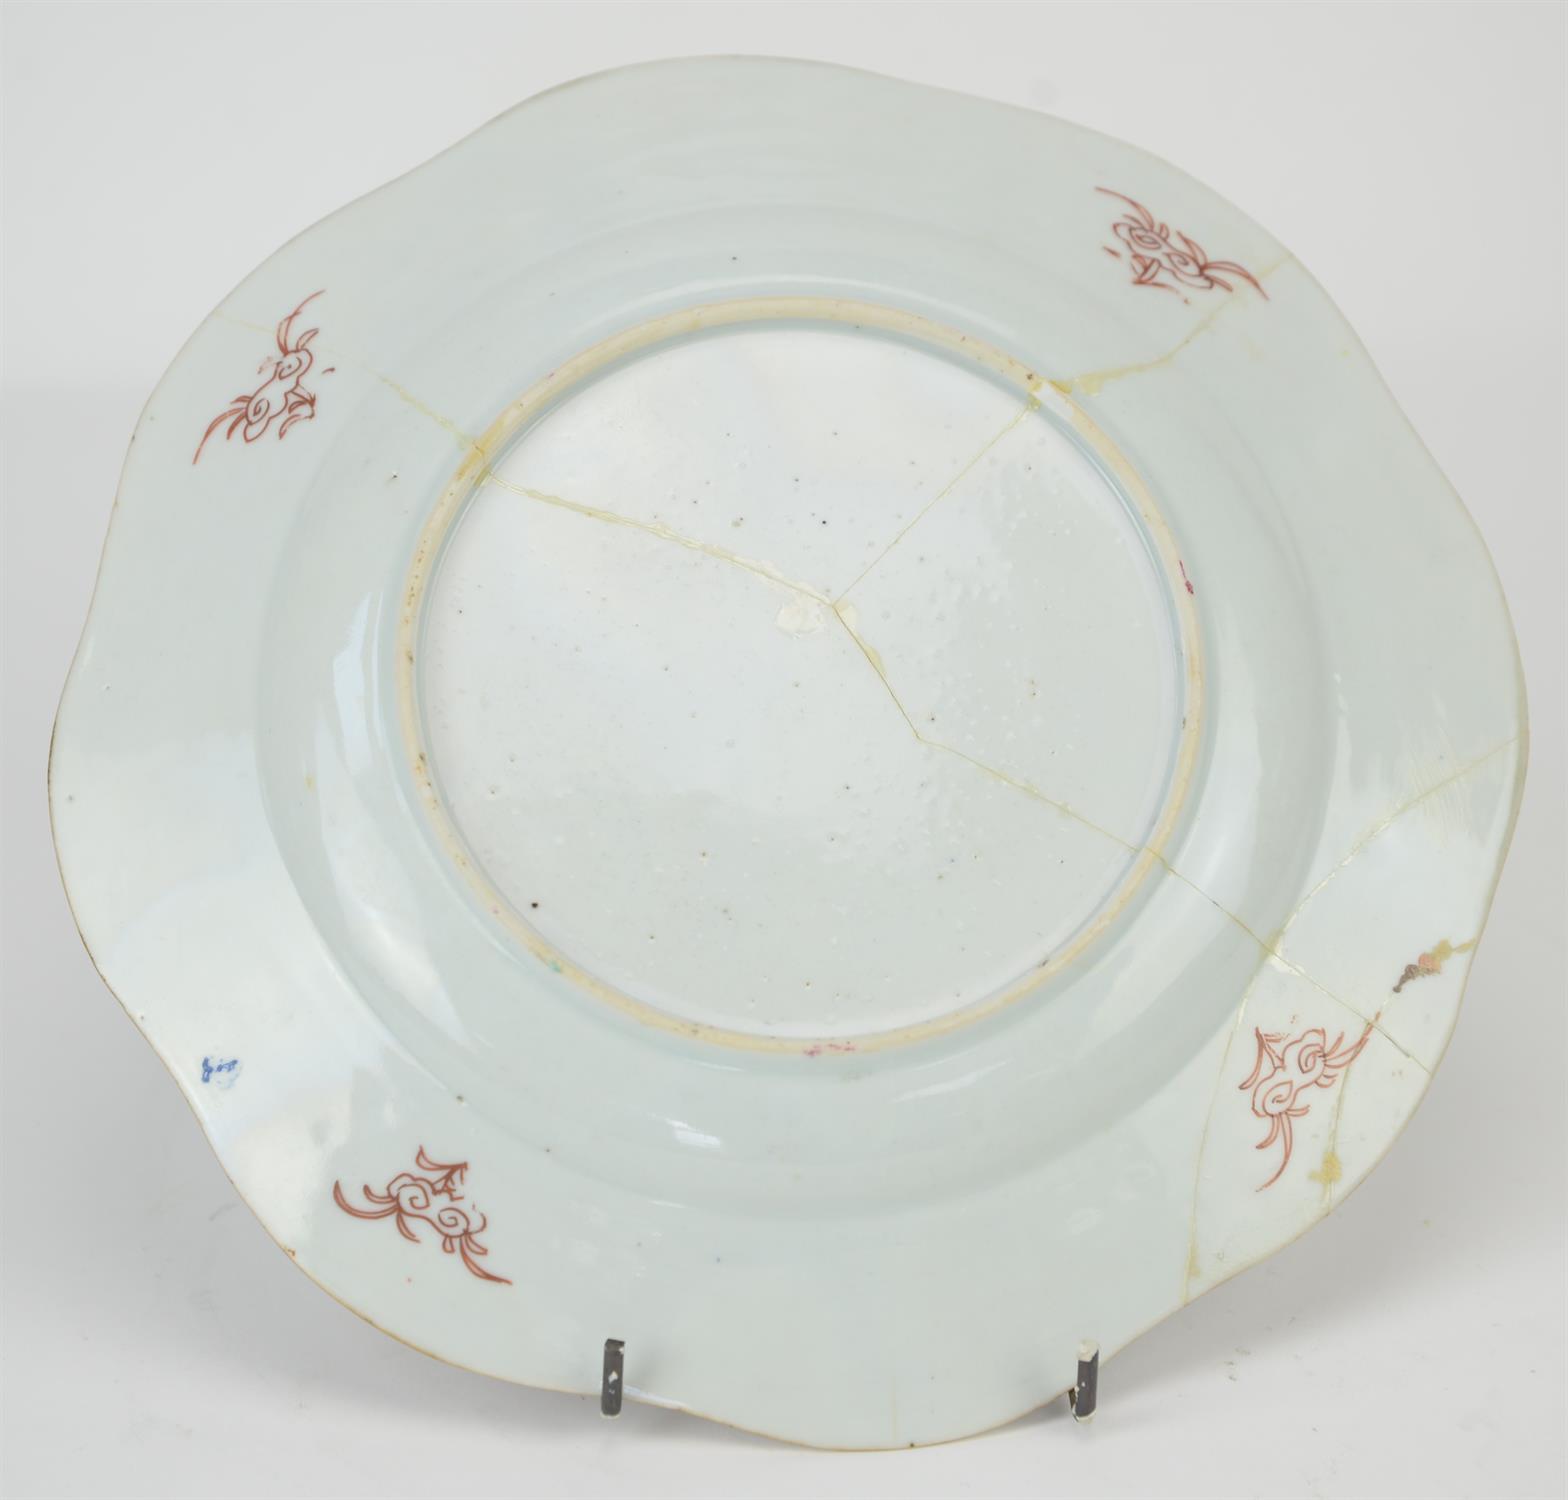 Eight famille rose dishes; each one decorated with floral designs and about 22.5 cm diameter, - Image 8 of 28